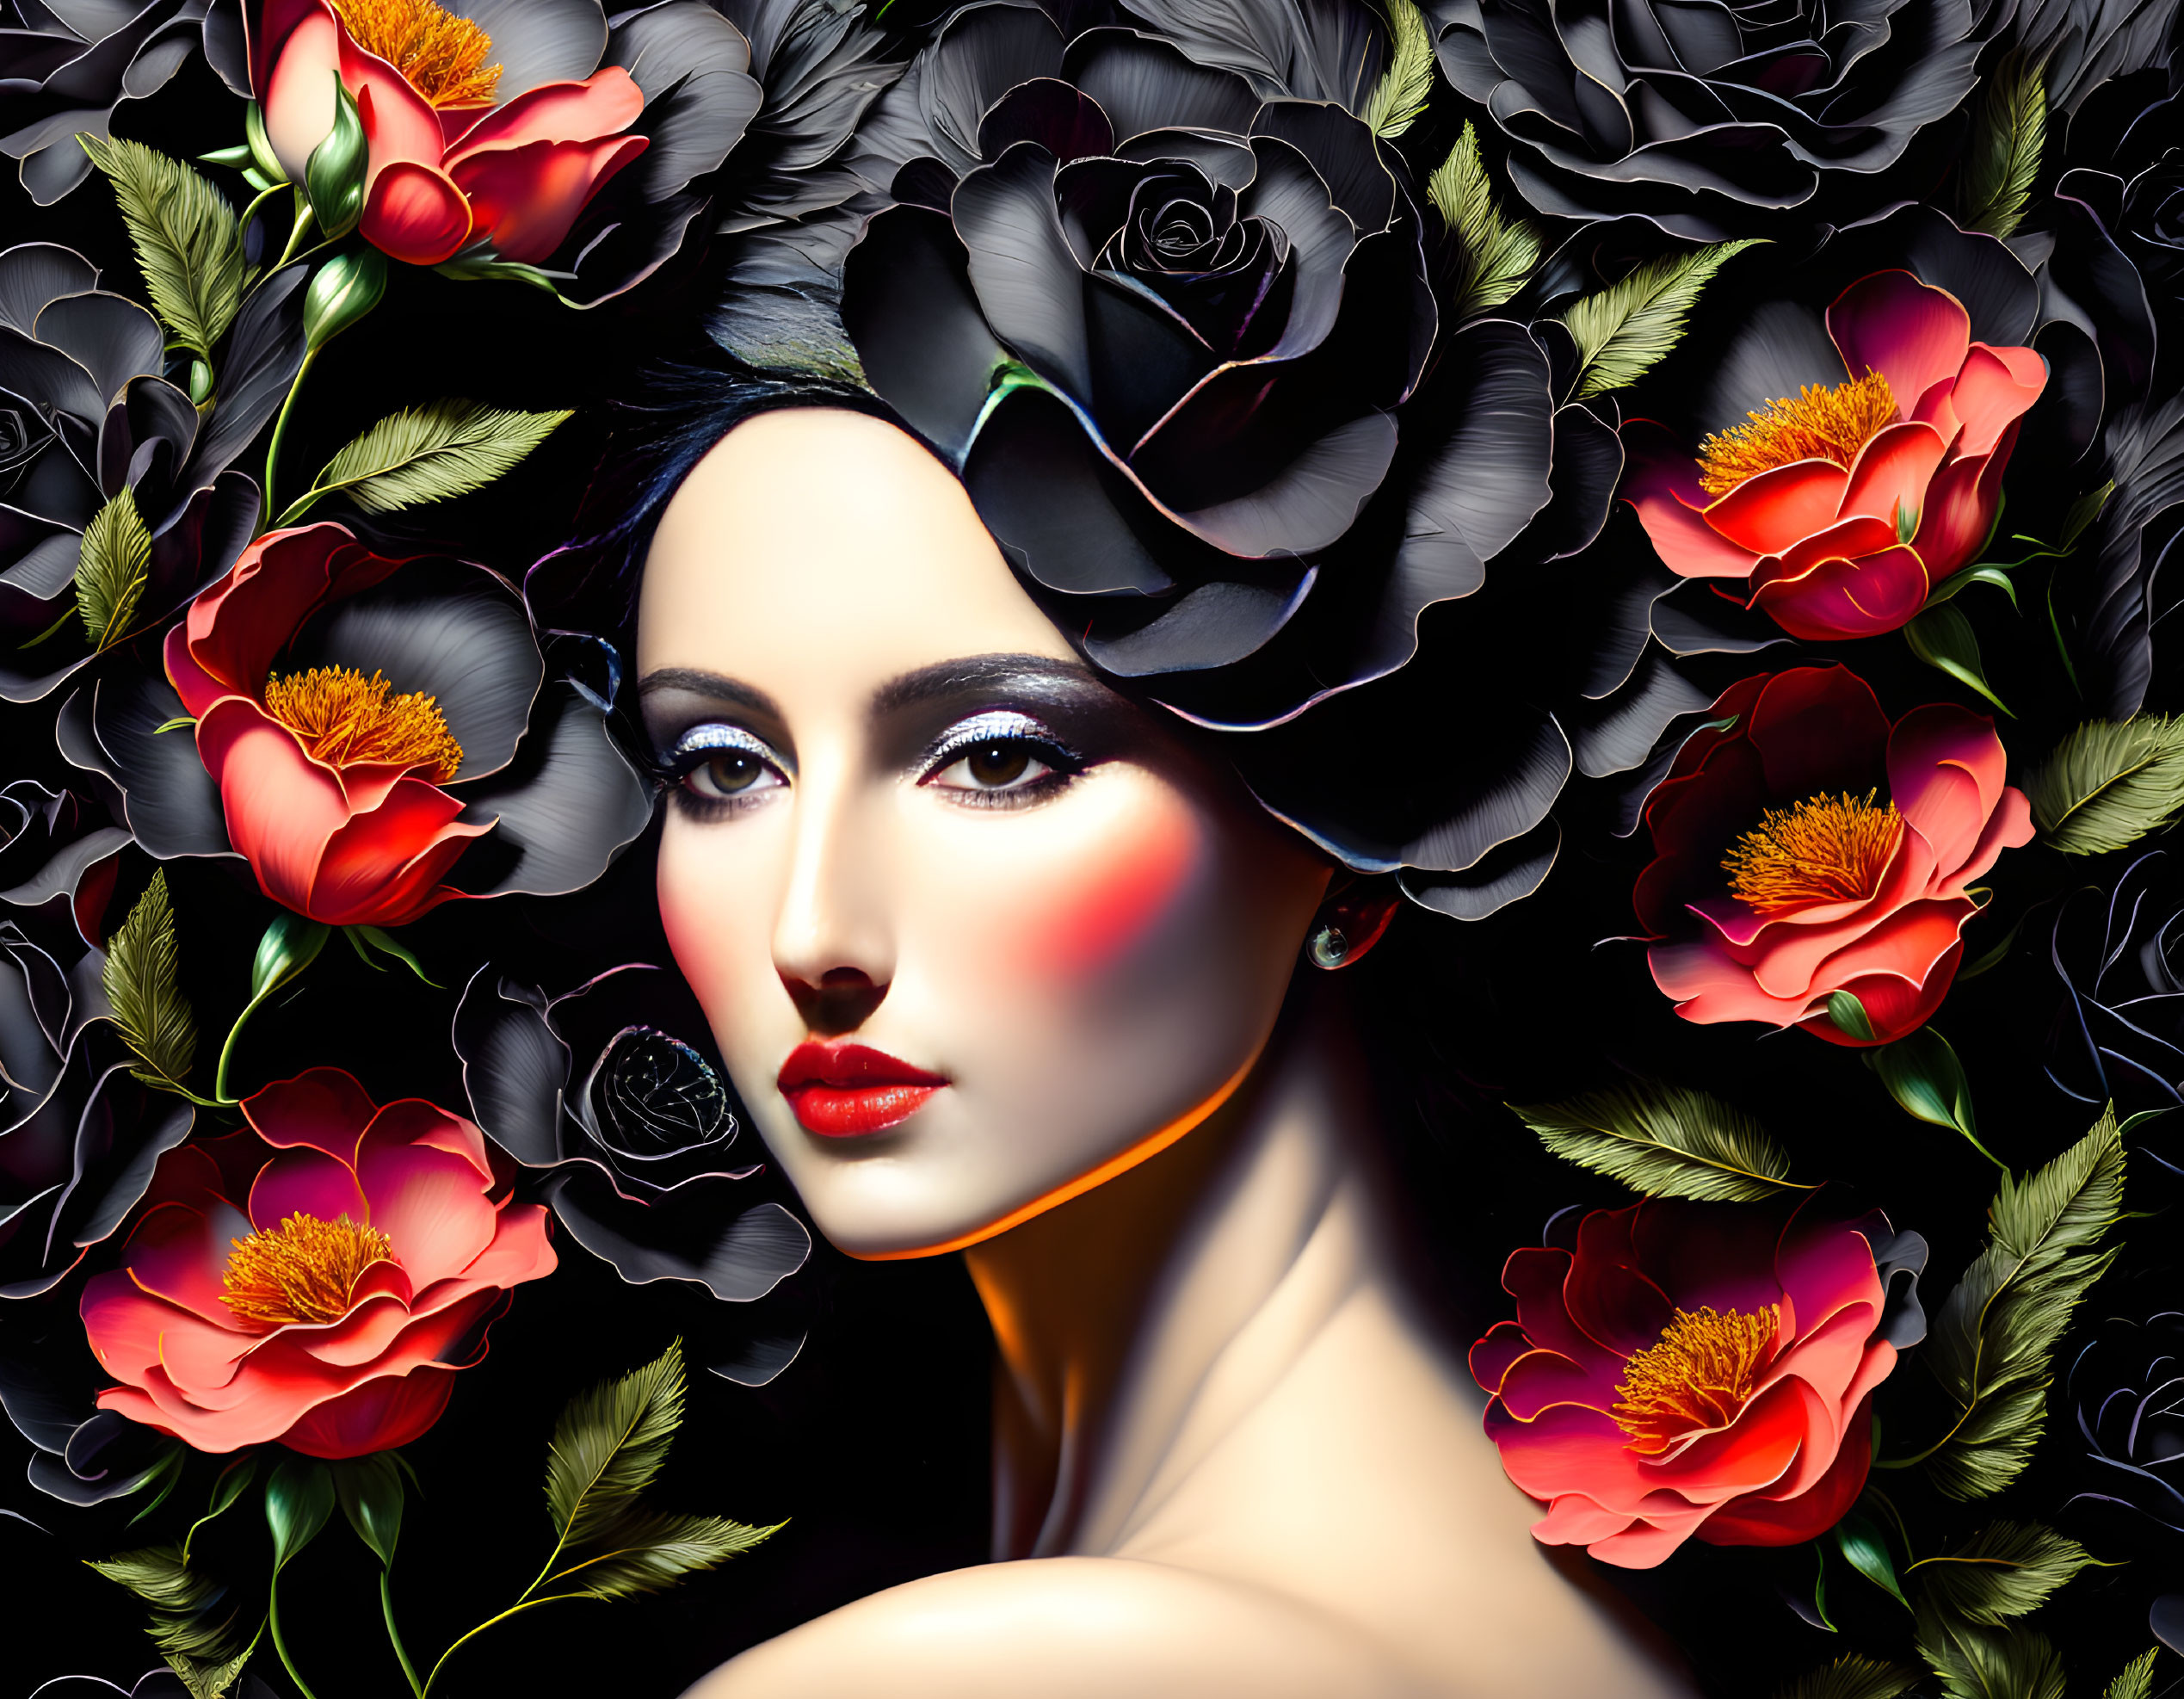 Beautiful lady surrounded by black roses